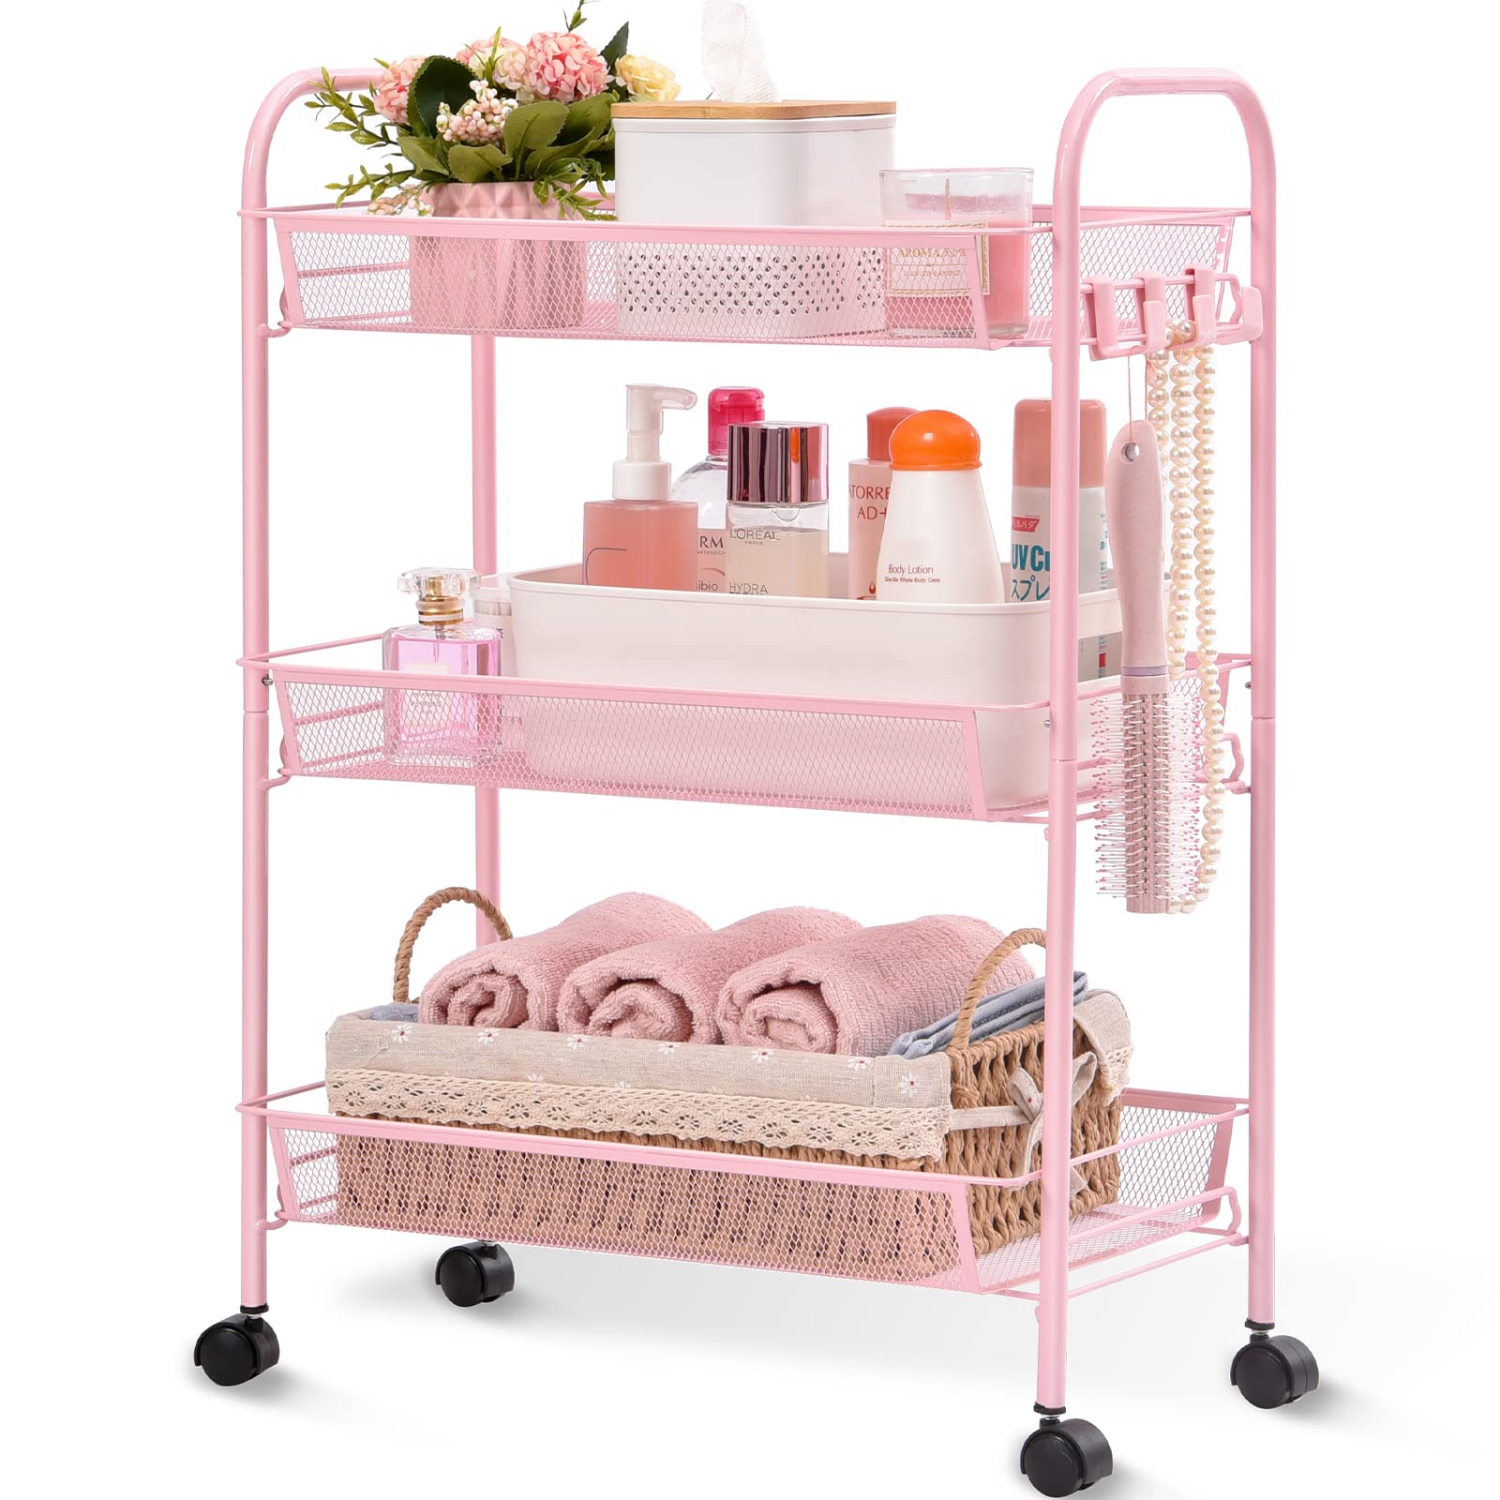 3-Tier Rolling Cart,Easy Assemble Mobile Storage Trolley On Wheels,Slide Out Utility Cart Shelving Units Kitchen Bathroom Laundry Room Pink